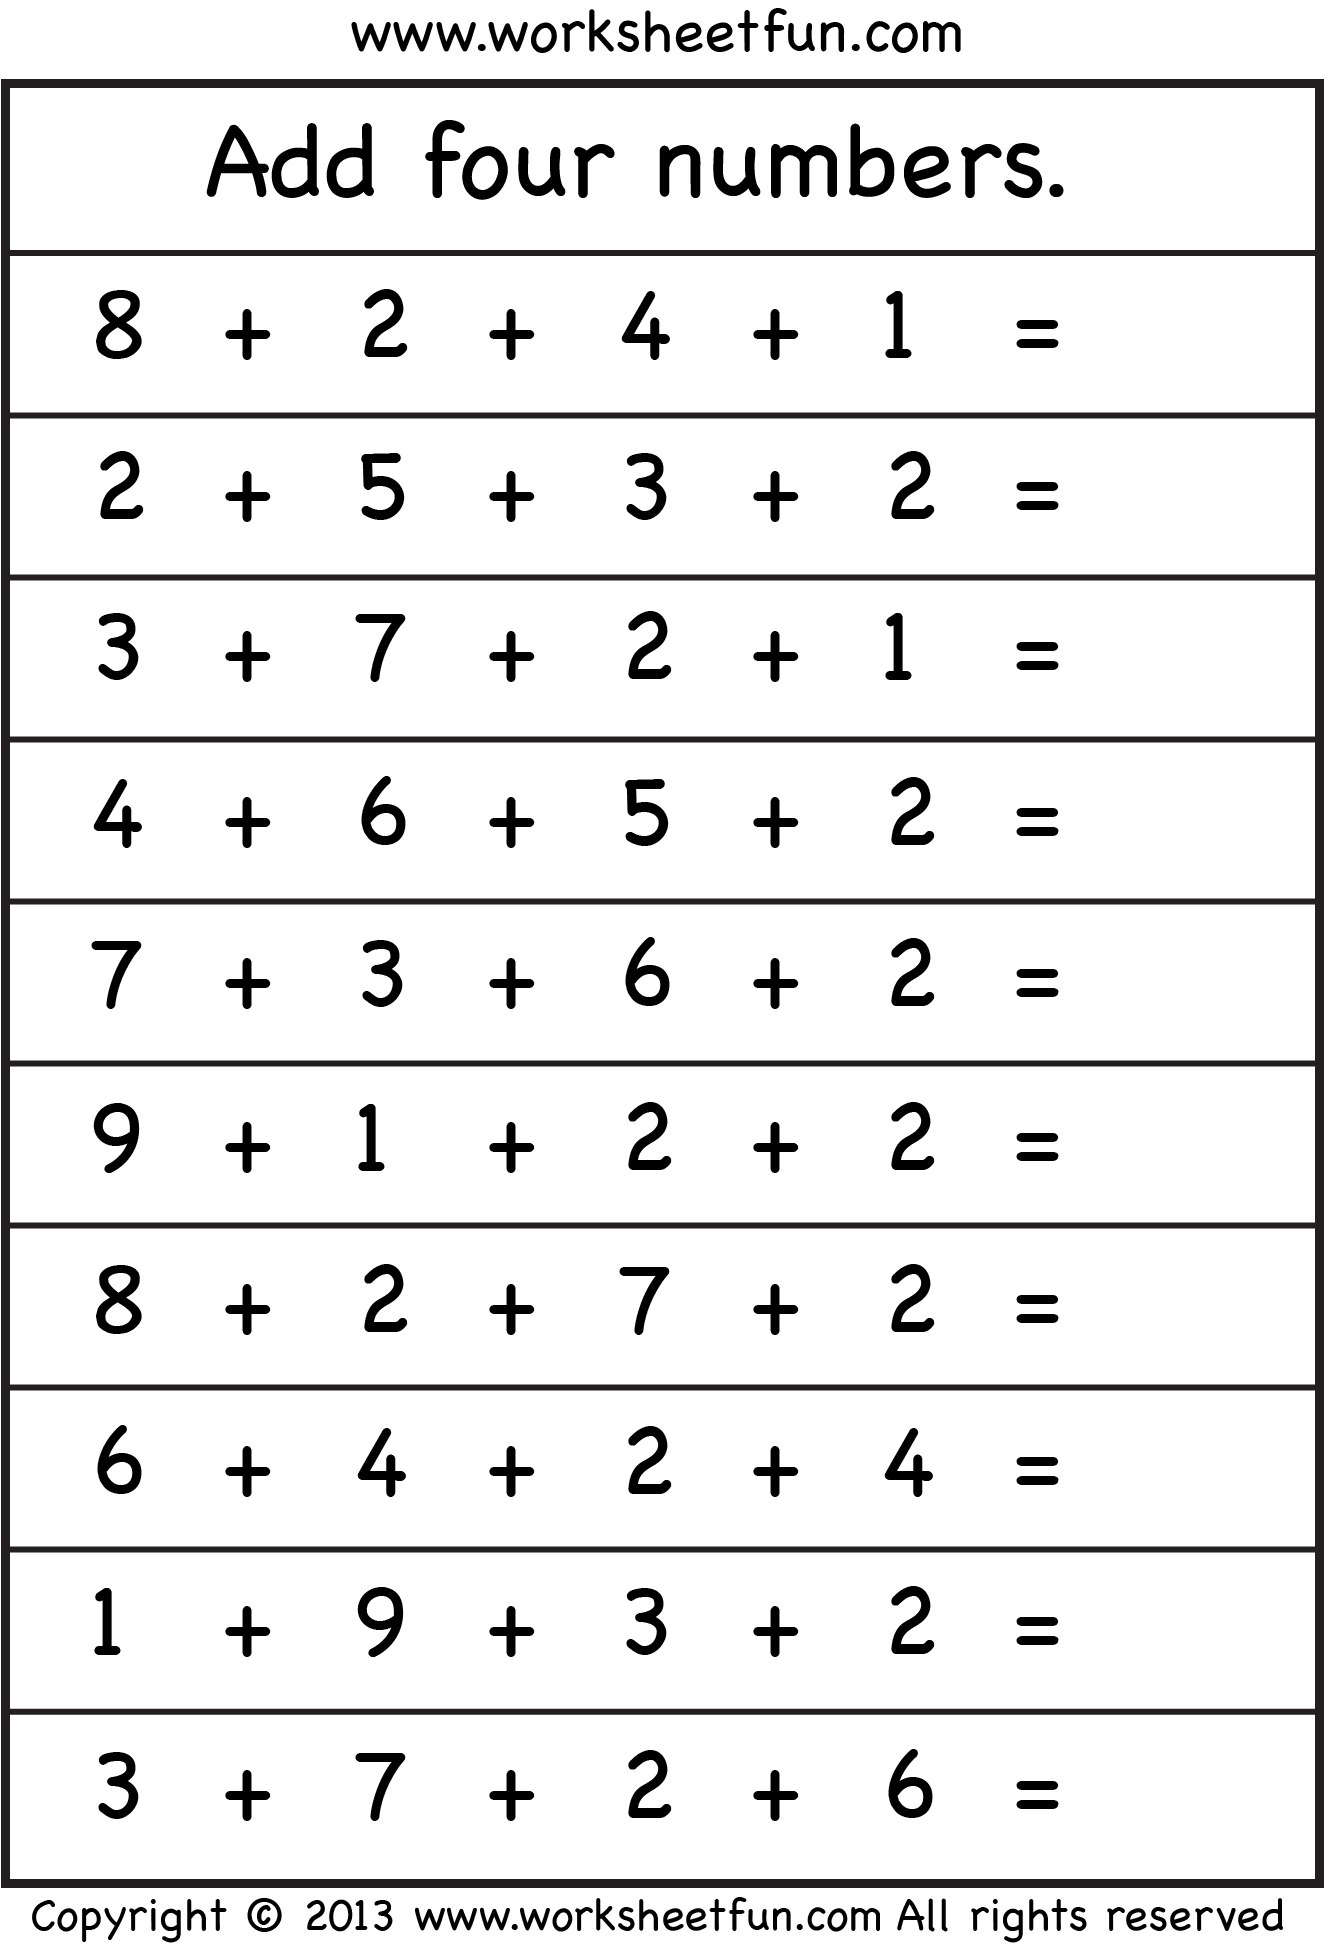 7-best-images-of-adding-3-numbers-worksheets-printable-first-grade-worksheets-adding-3-numbers